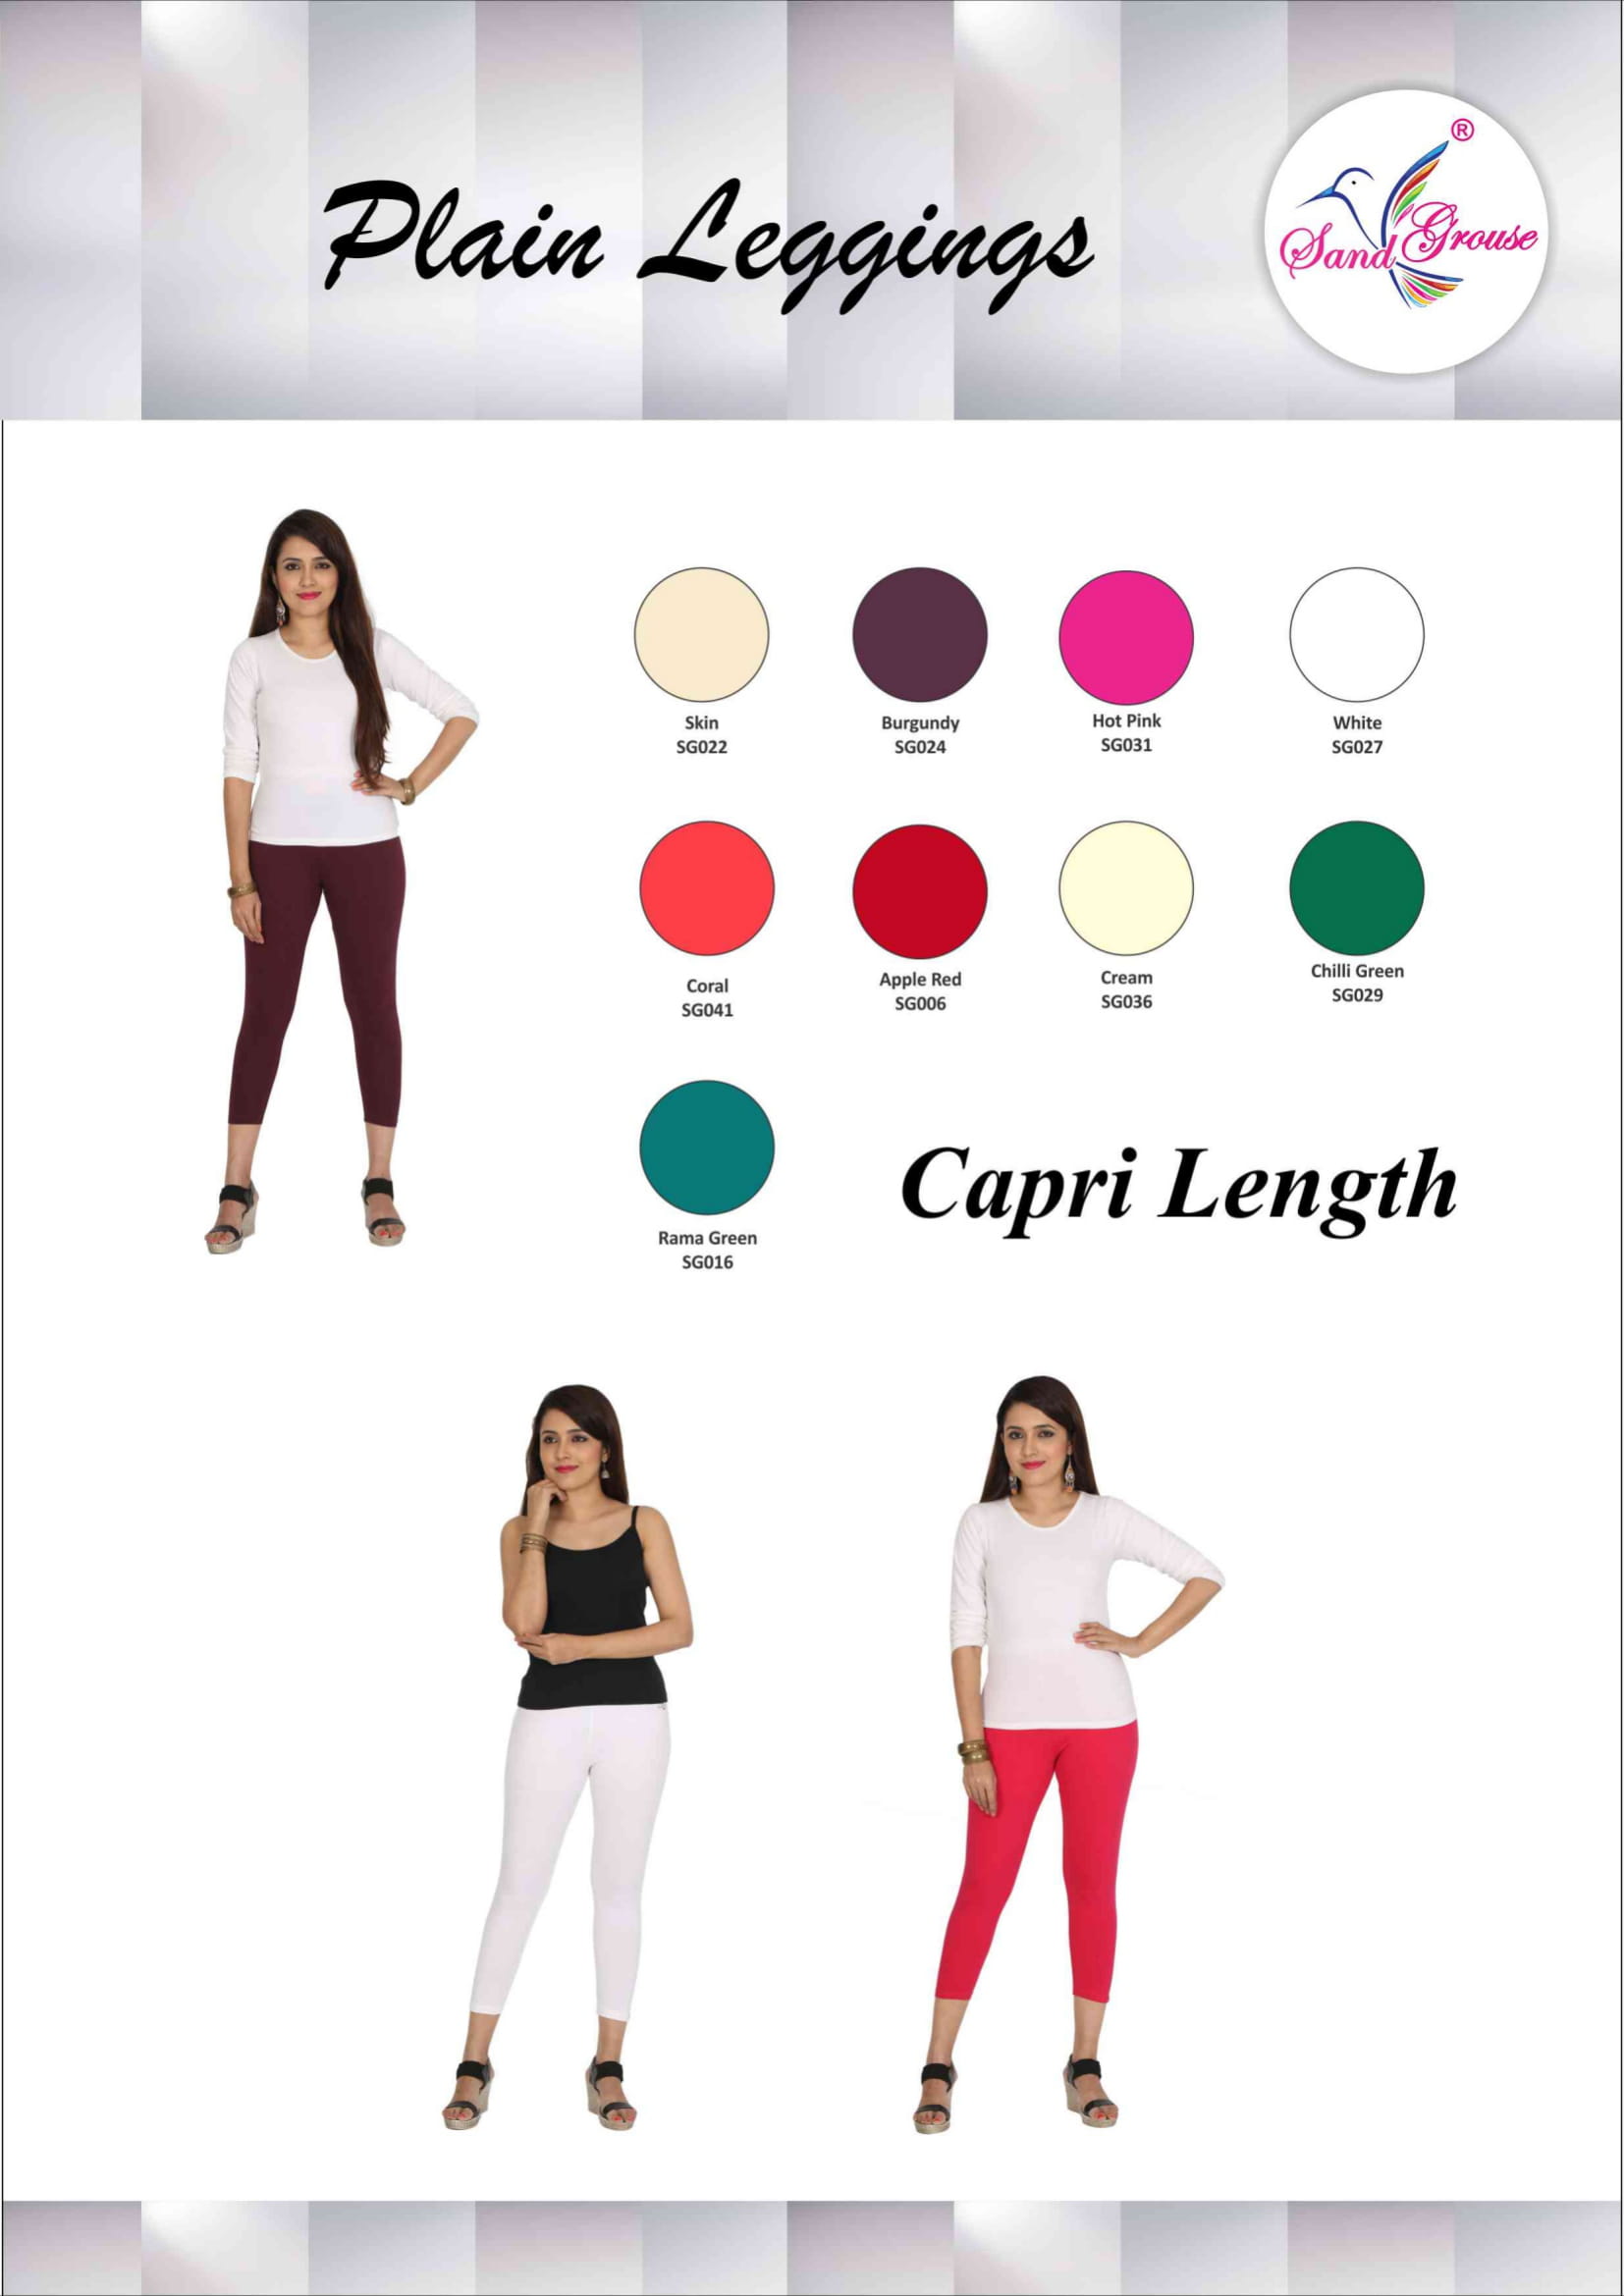 He Gud Look Multicoloured Stretch Legging Combo 1425368 Thml - Buy He Gud  Look Multicoloured Stretch Legging Combo 1425368 Thml online in India